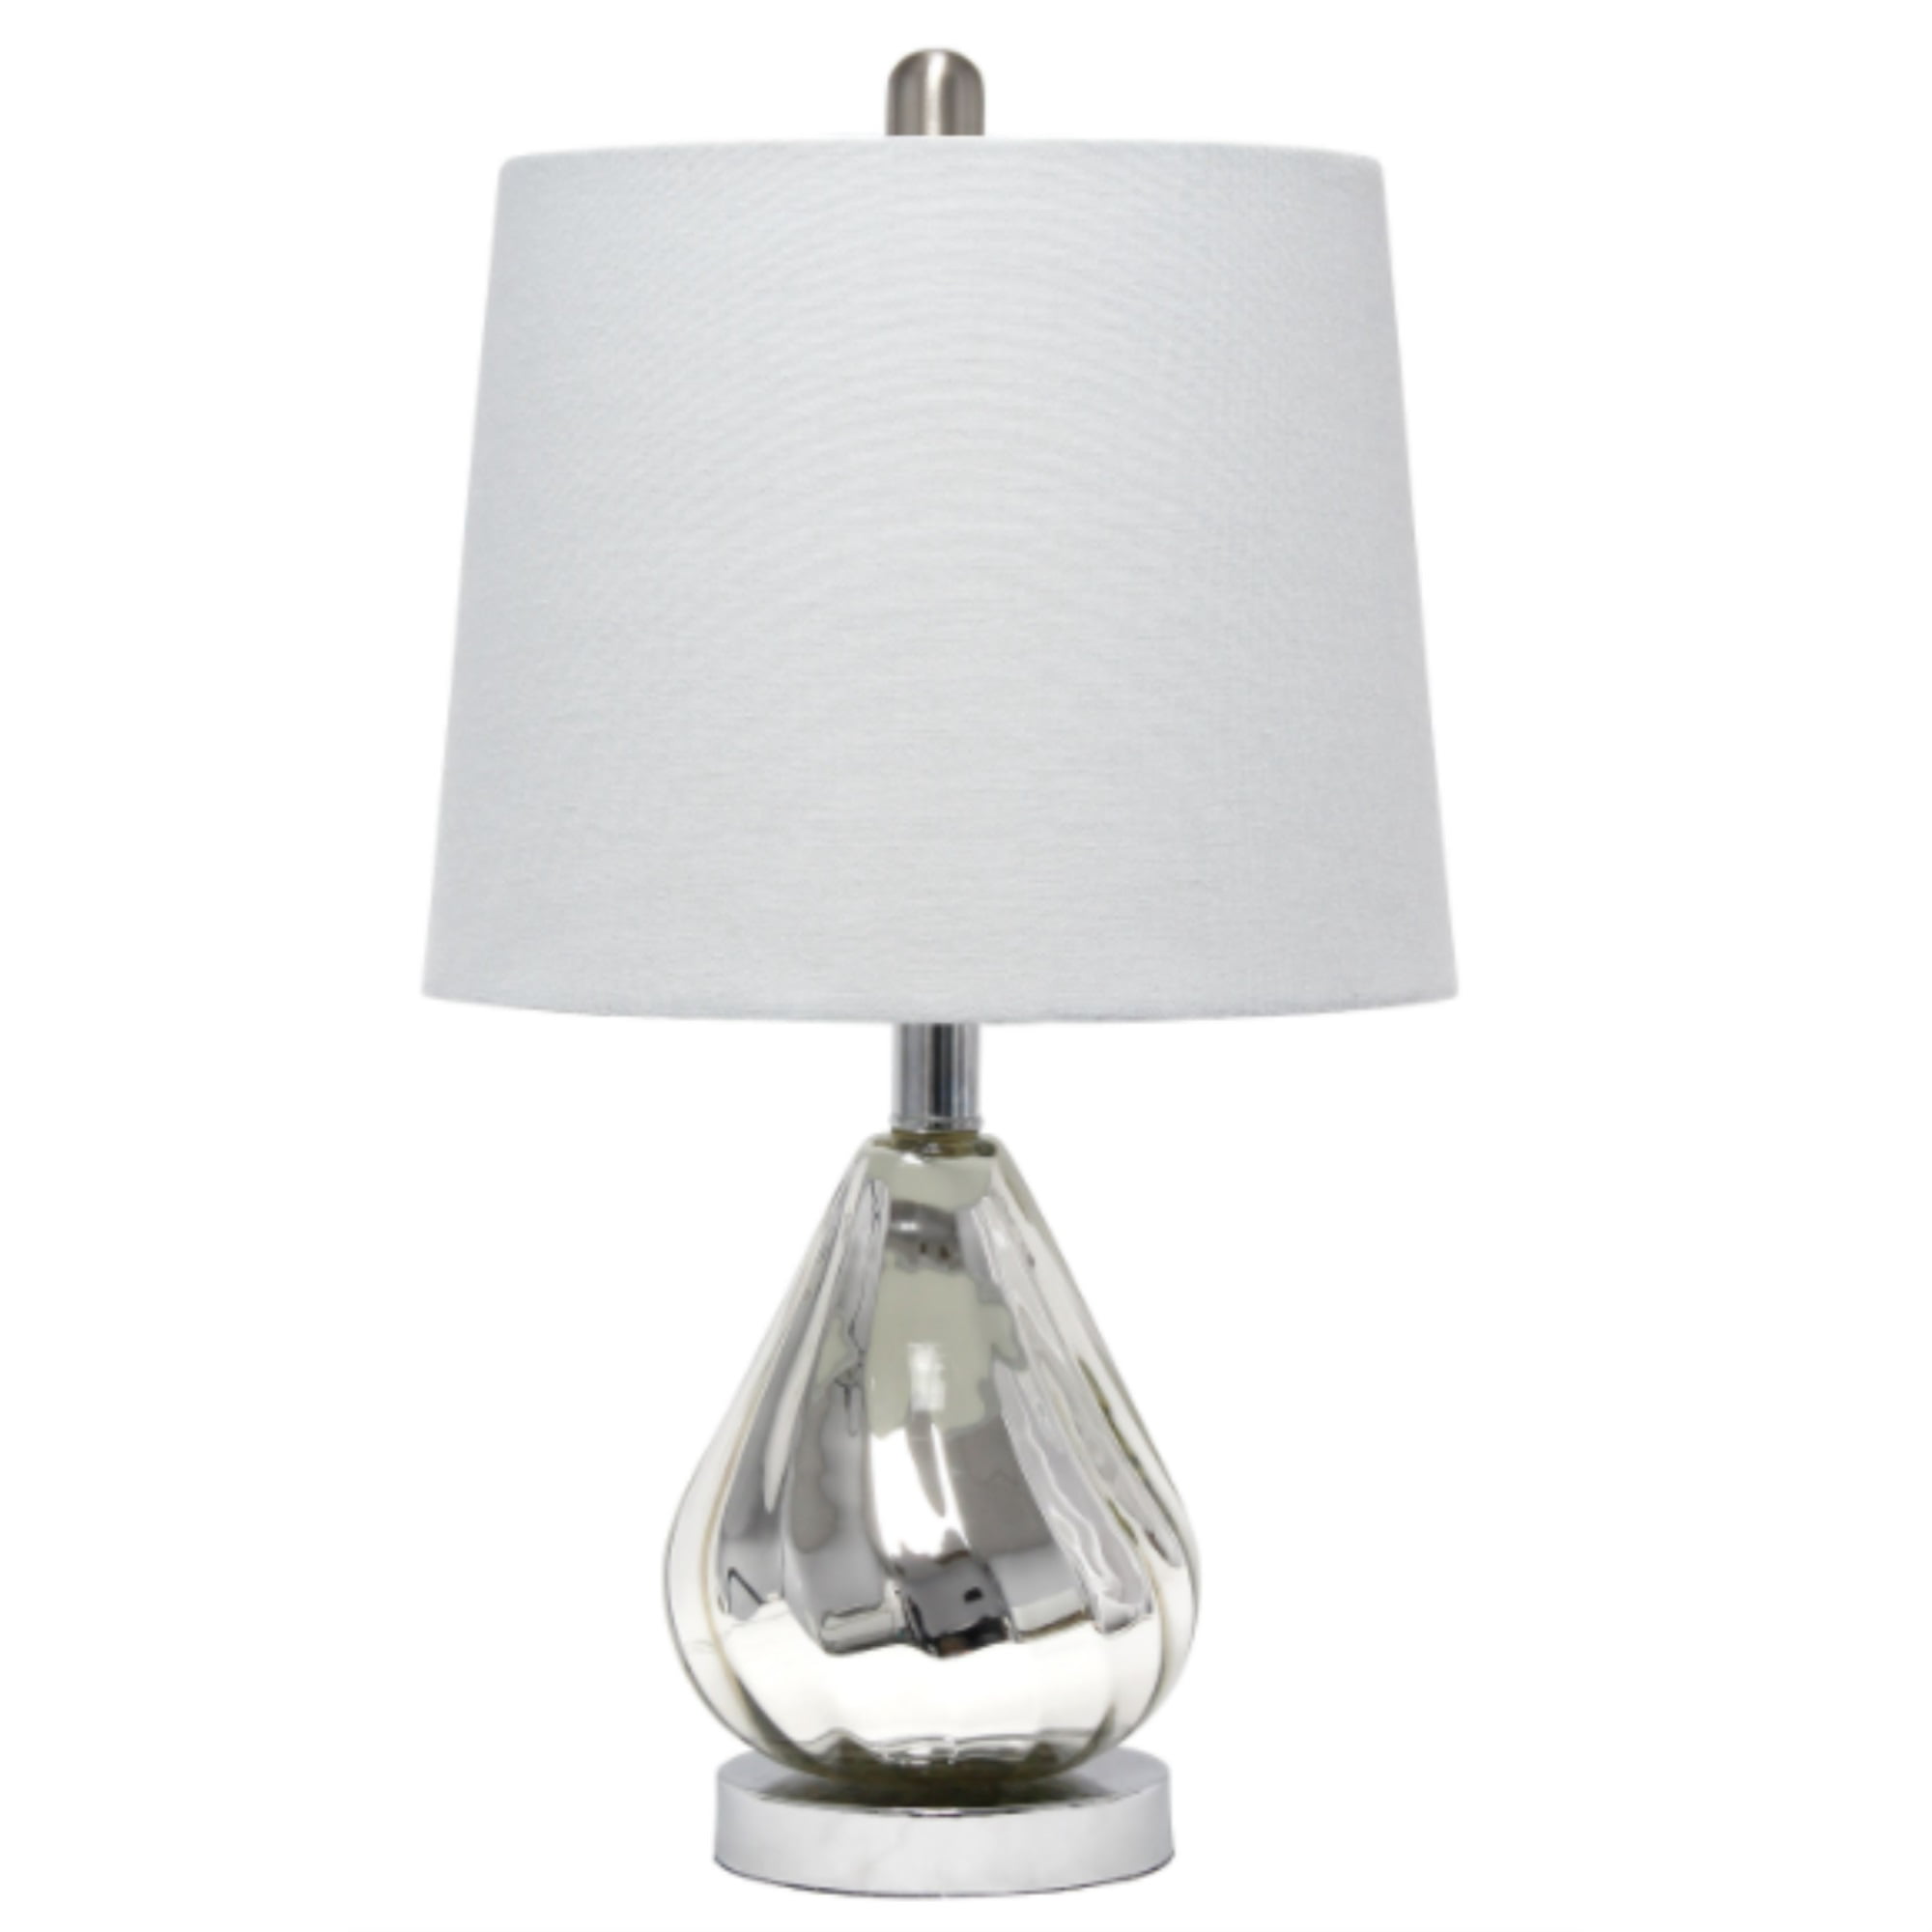 Lalia Home Kissy Pear Table Lamp with Gray Fabric Shade